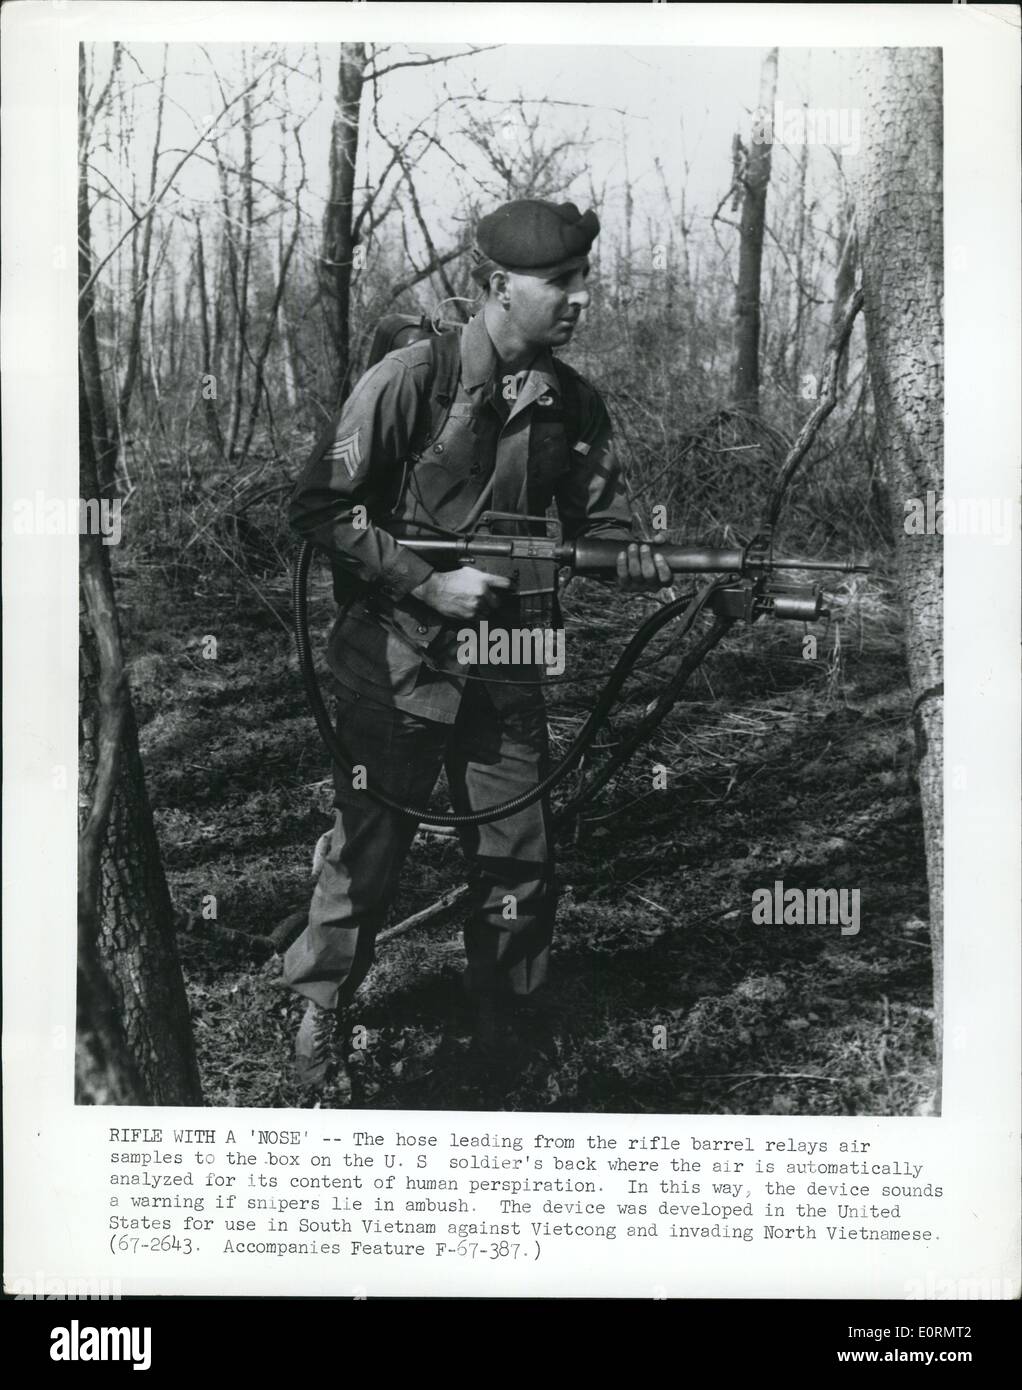 Jan 1, 1960 - Rifle with a Nose: The hose leading from the rifle barrel relays air samples to the box on the U.S. soldier's back where the air is automatically analyzed for its content of human perspiration. In this way the device sounds a warning if snipers lie in ambush. The device was developed in the United States for use in South Vietnam against Vietcong and invading North Vietnamese. Stock Photo